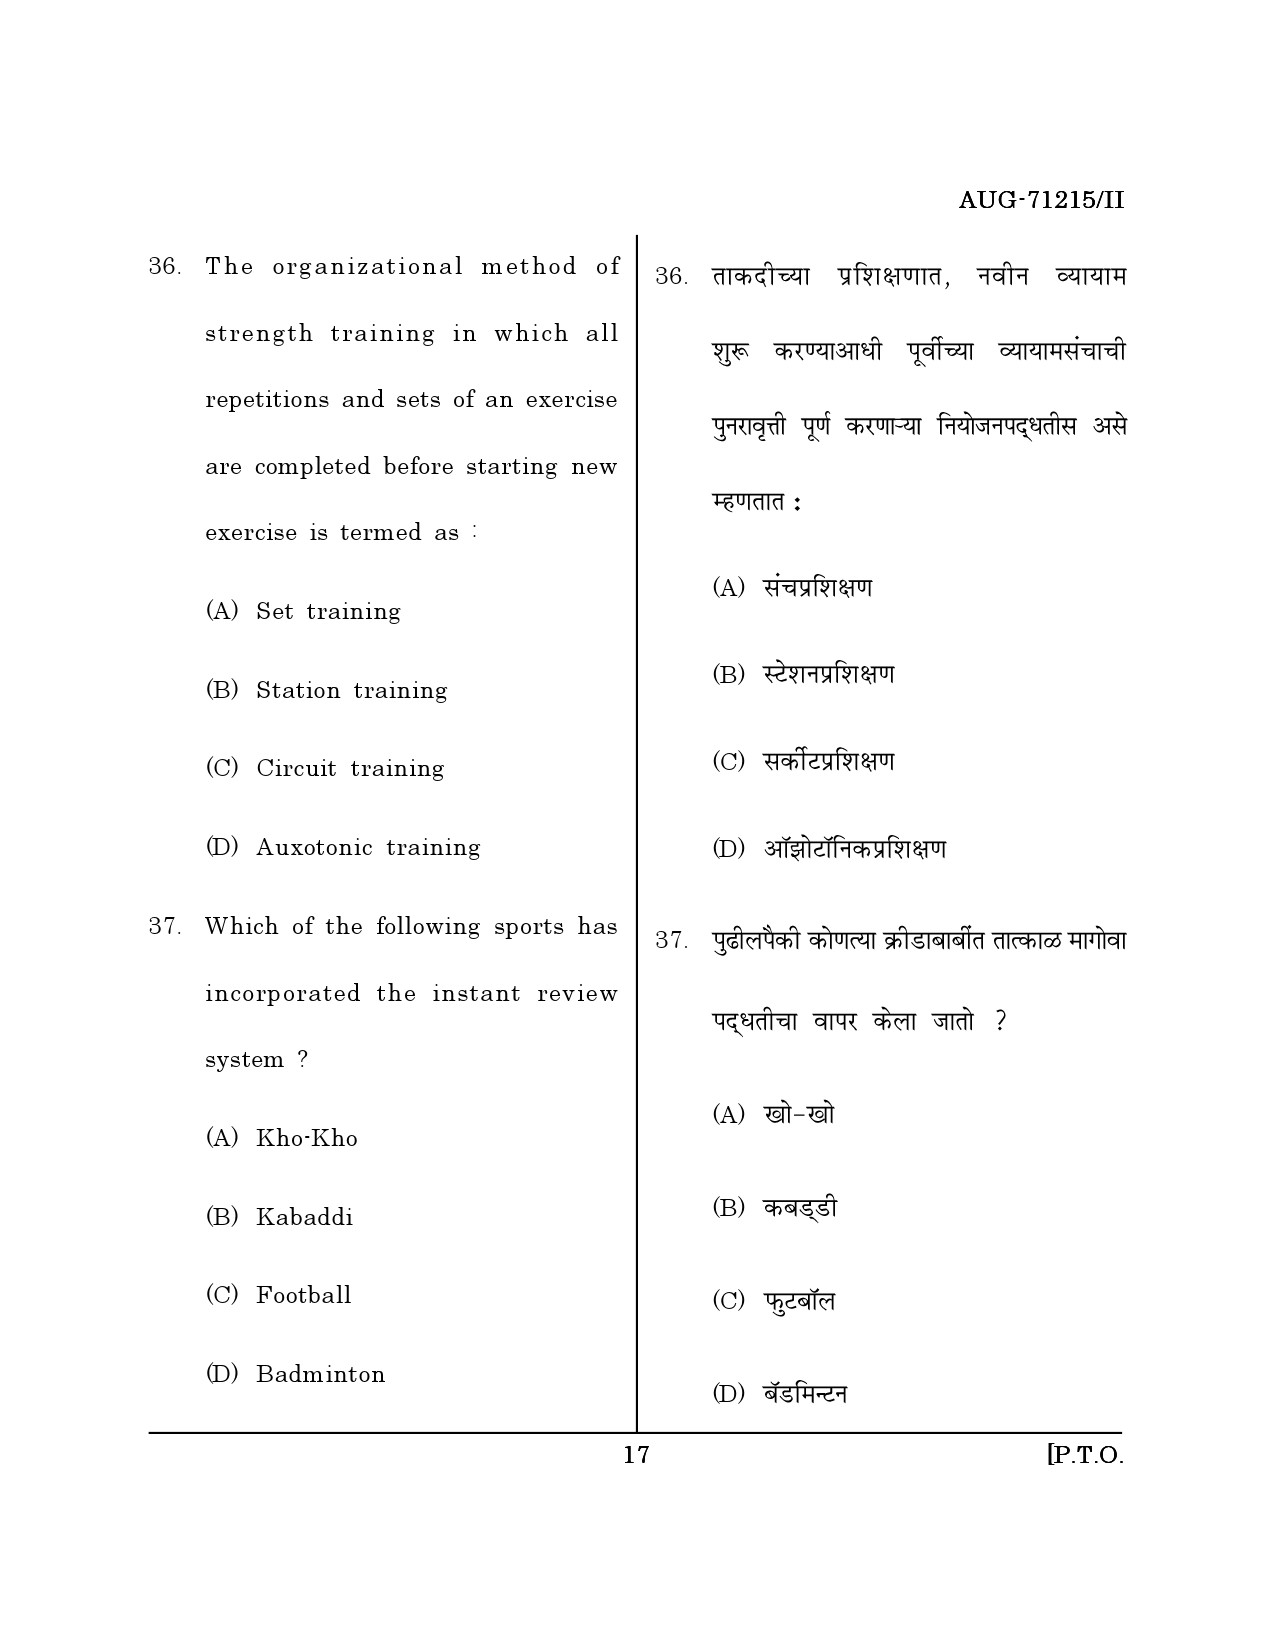 Maharashtra SET Physical Education Question Paper II August 2015 16